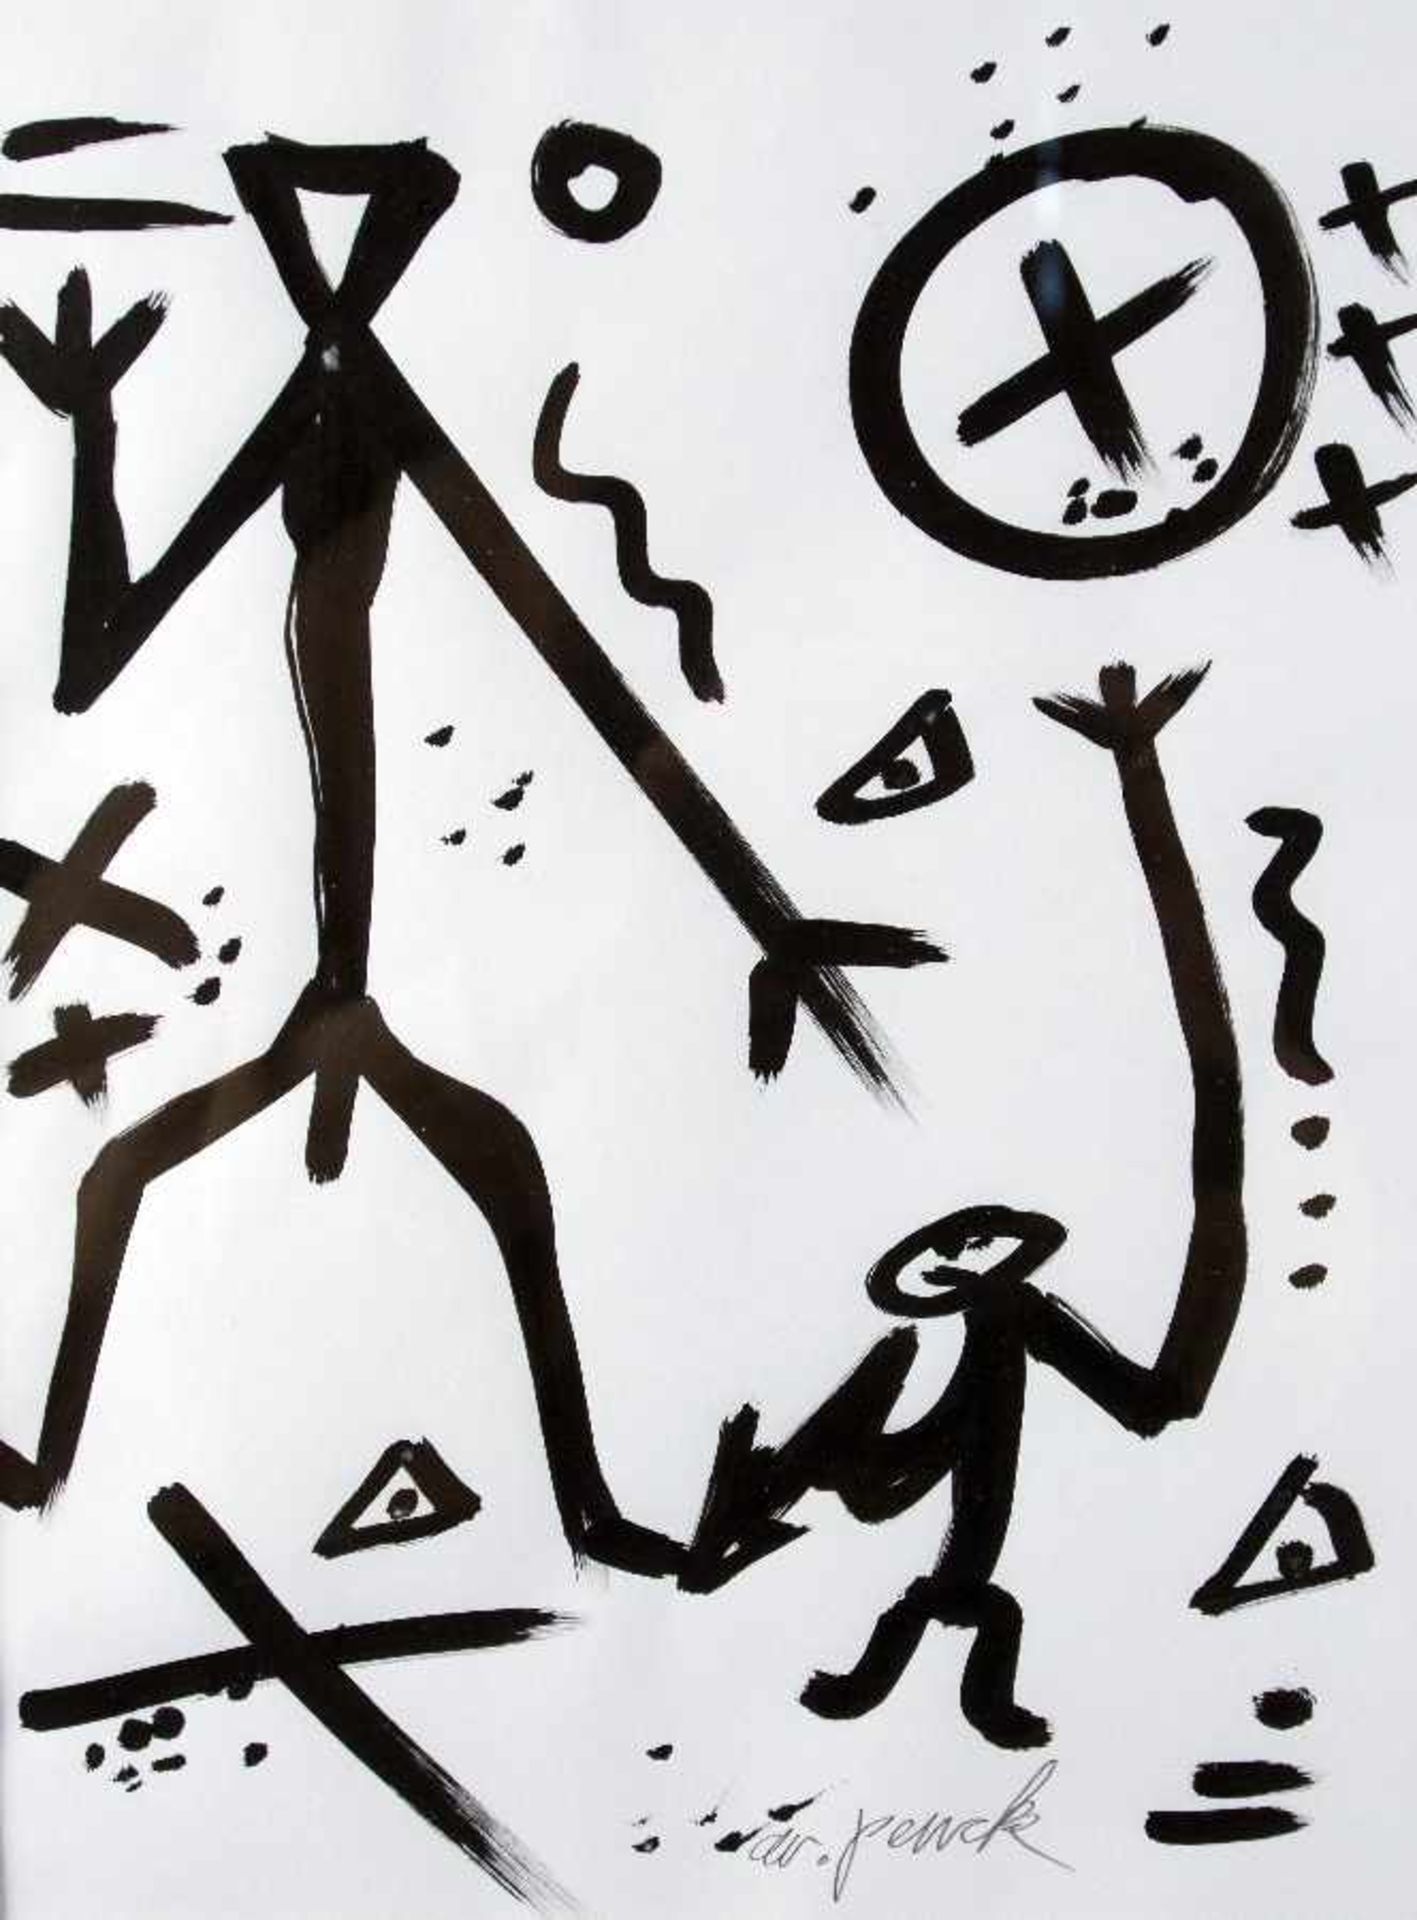 A. R. Penck1939 DresdenUntitledInk brush drawing on paper; H 280 mm, W 210 mm; signed lower